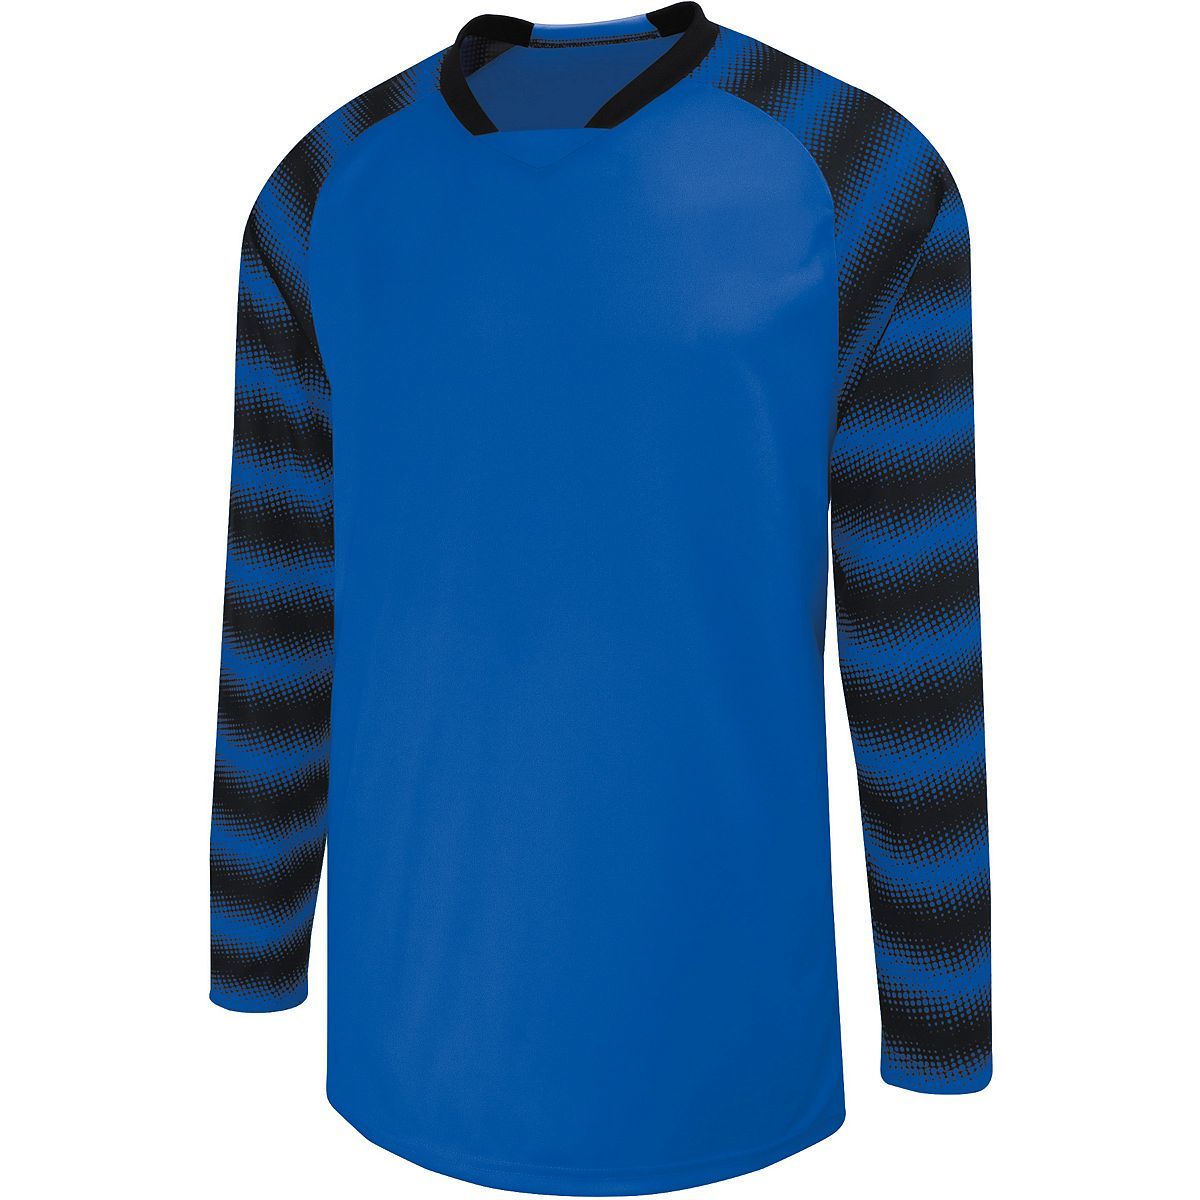 Youth Prism Goalkeeper Jersey 324361